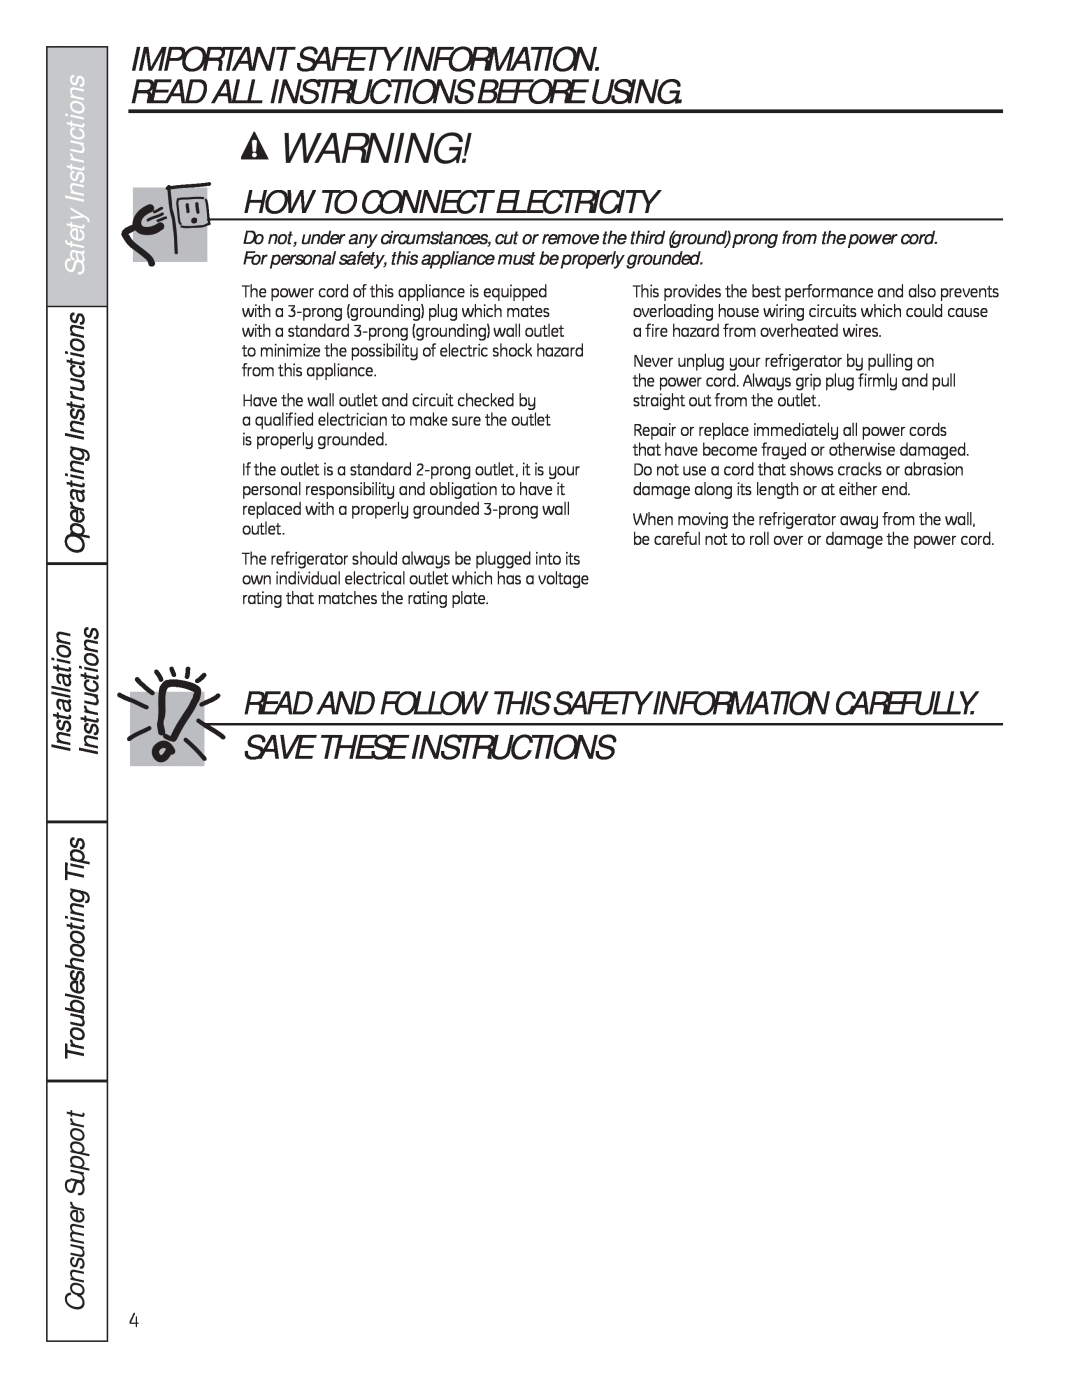 GE 200D8074P050 How To Connect Electricity, Save These Instructions, Operating Instructions, Safety Instructions 